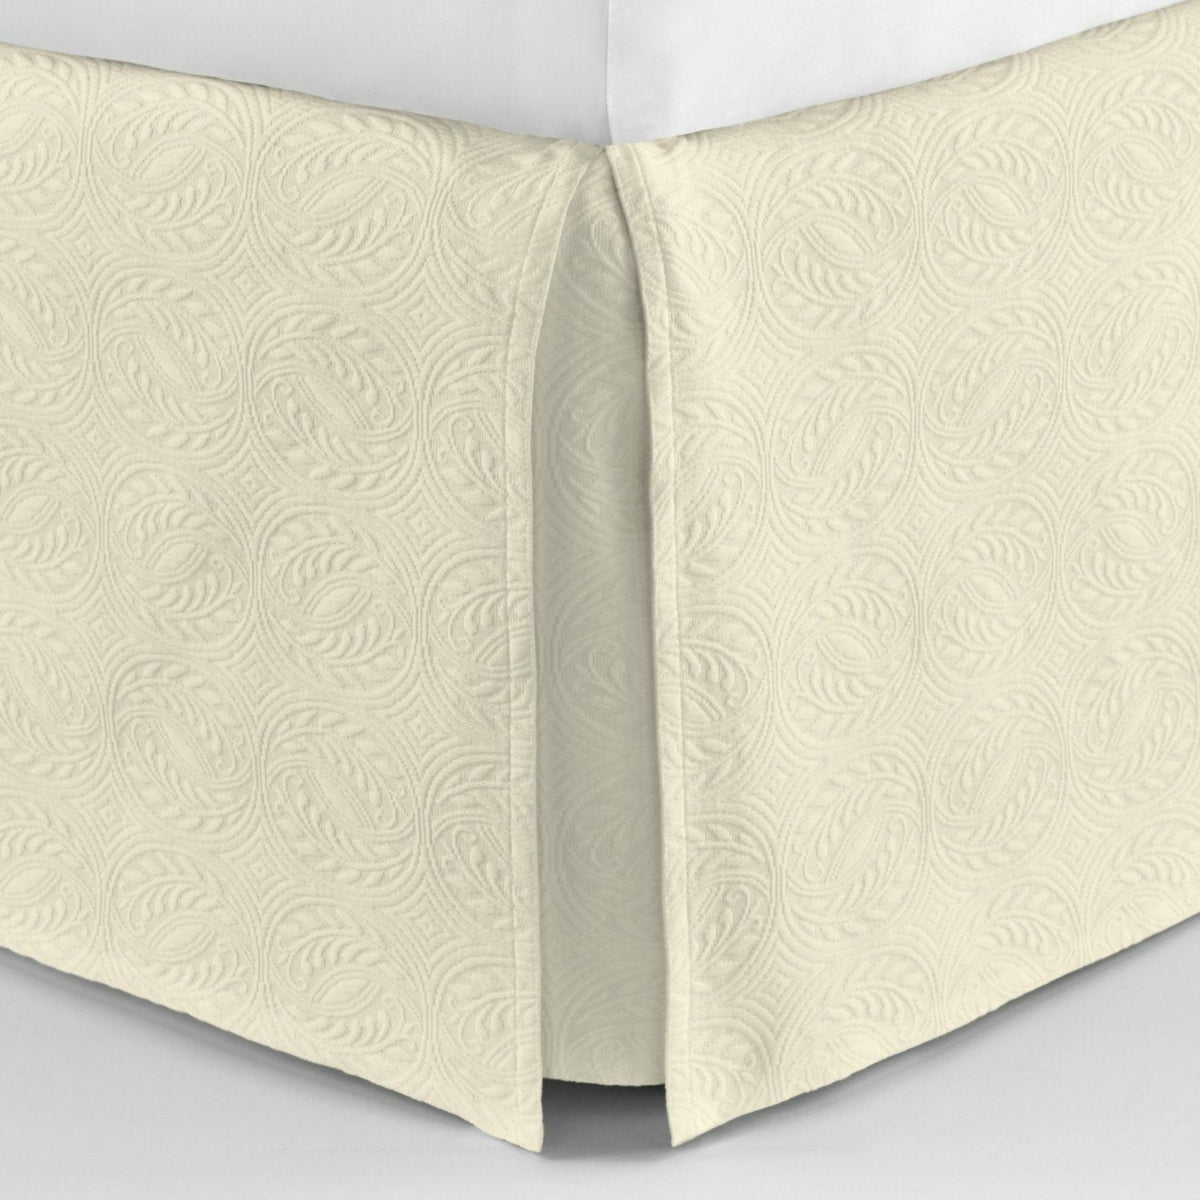 Peacock Alley Vienna Matelassé Tailored Bed Skirt Ivory Fine Linens